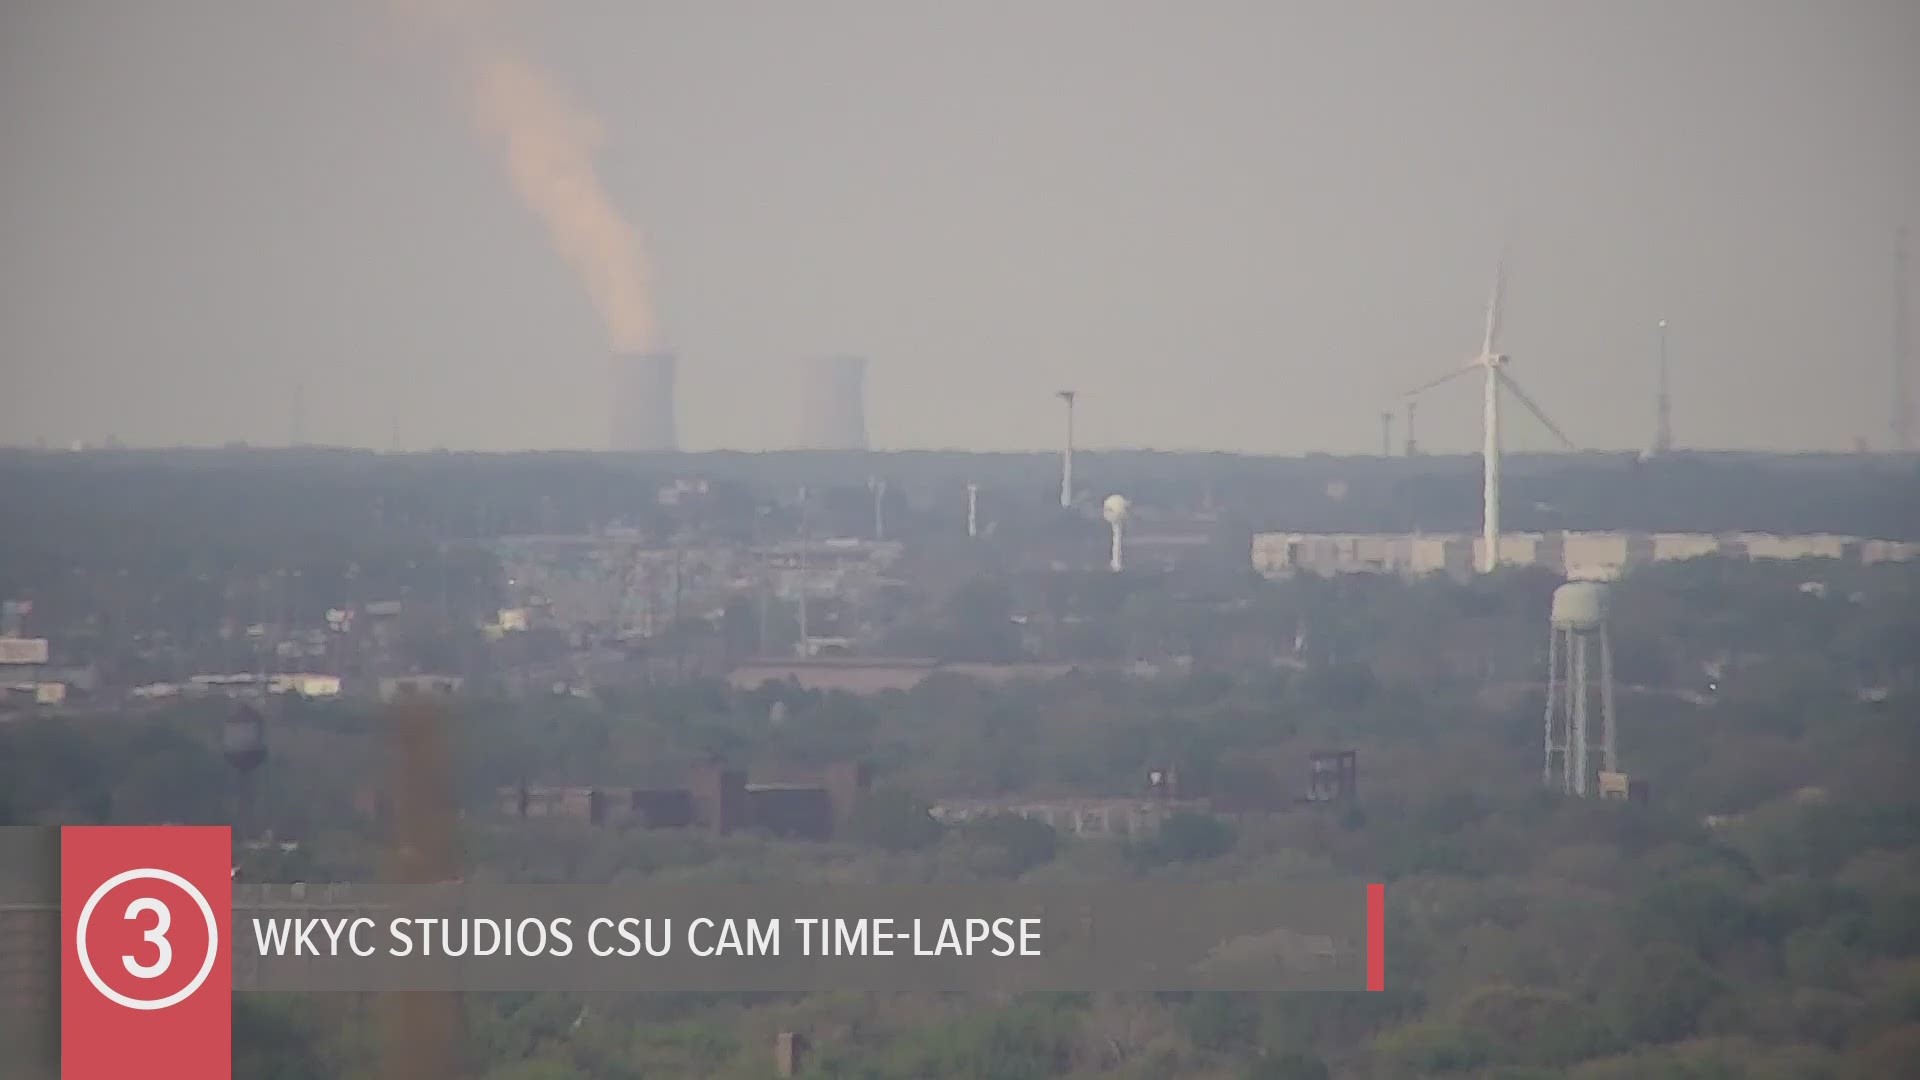 Check out our Saturday evening weather time-lapse showing the wind turbine at Lincoln Electric and the cooling towers at the Perry Nuclear Power Plant. #3weather